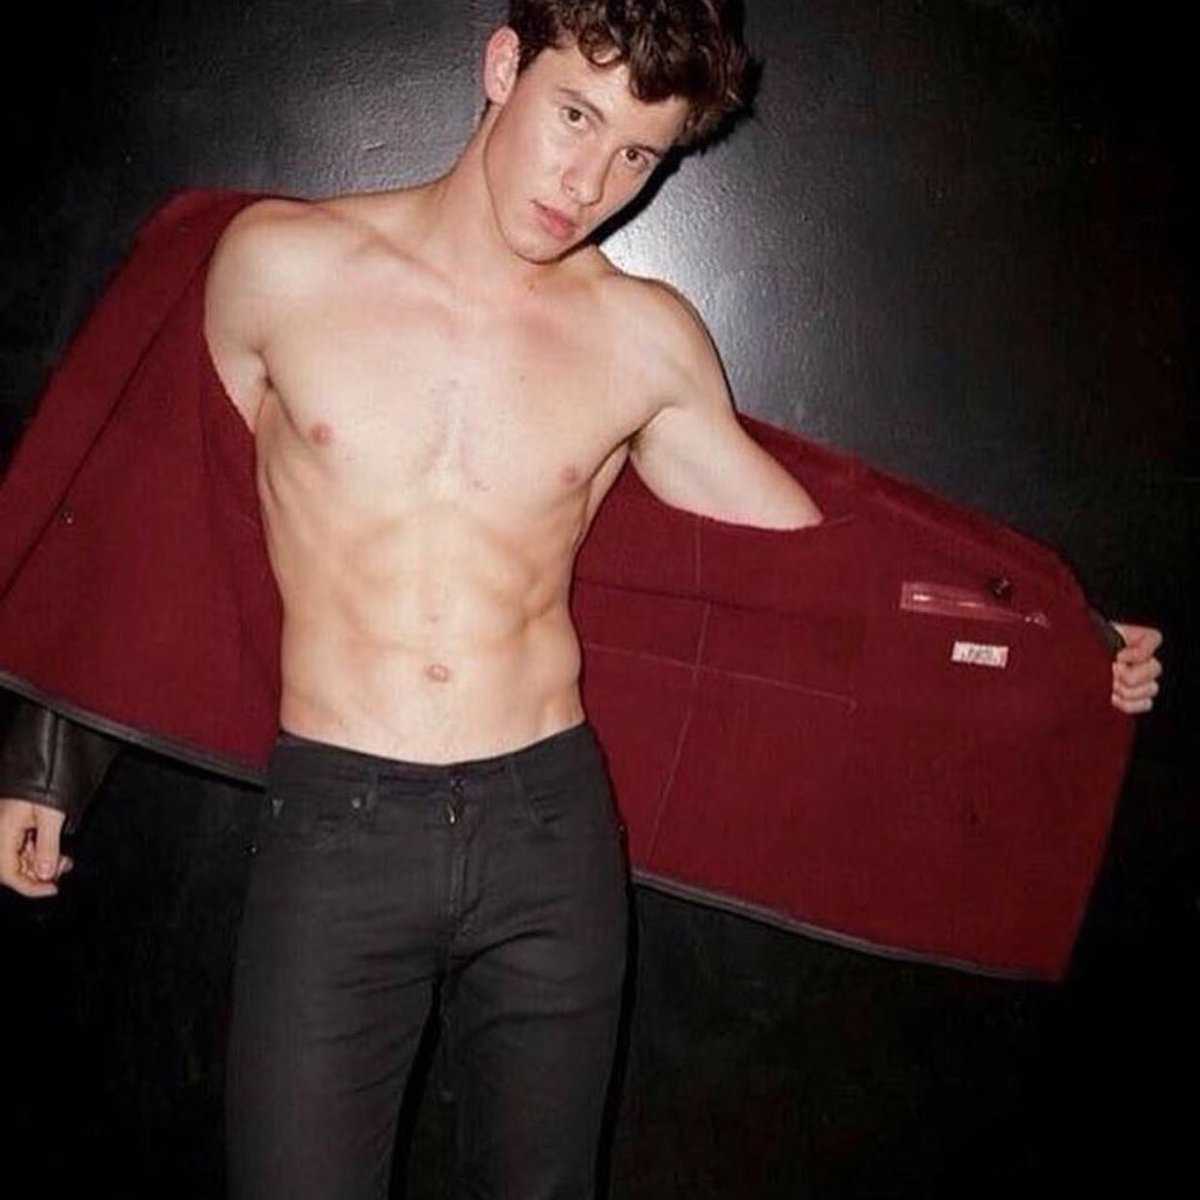 shawn mendes outtake